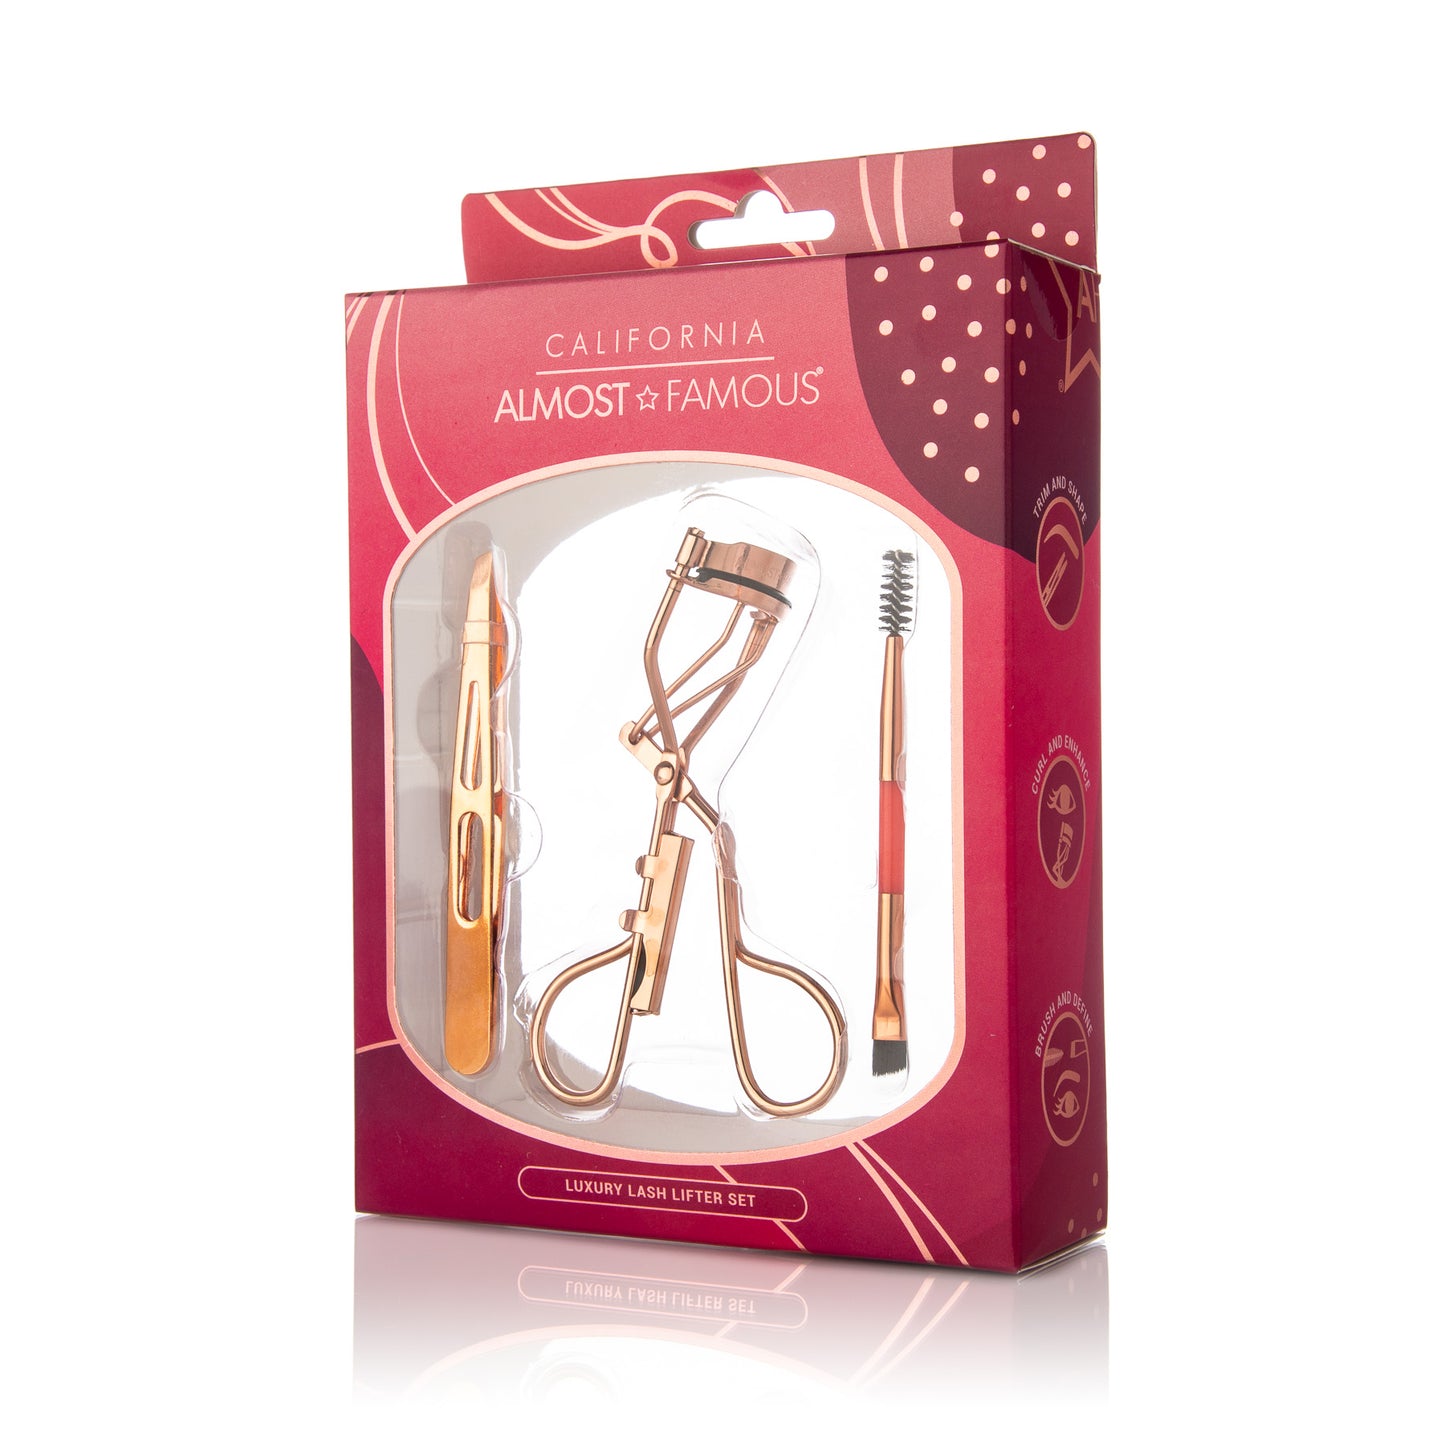 Lash Lifter Premium Eye Care Kit - Rose Gold by Almost famous